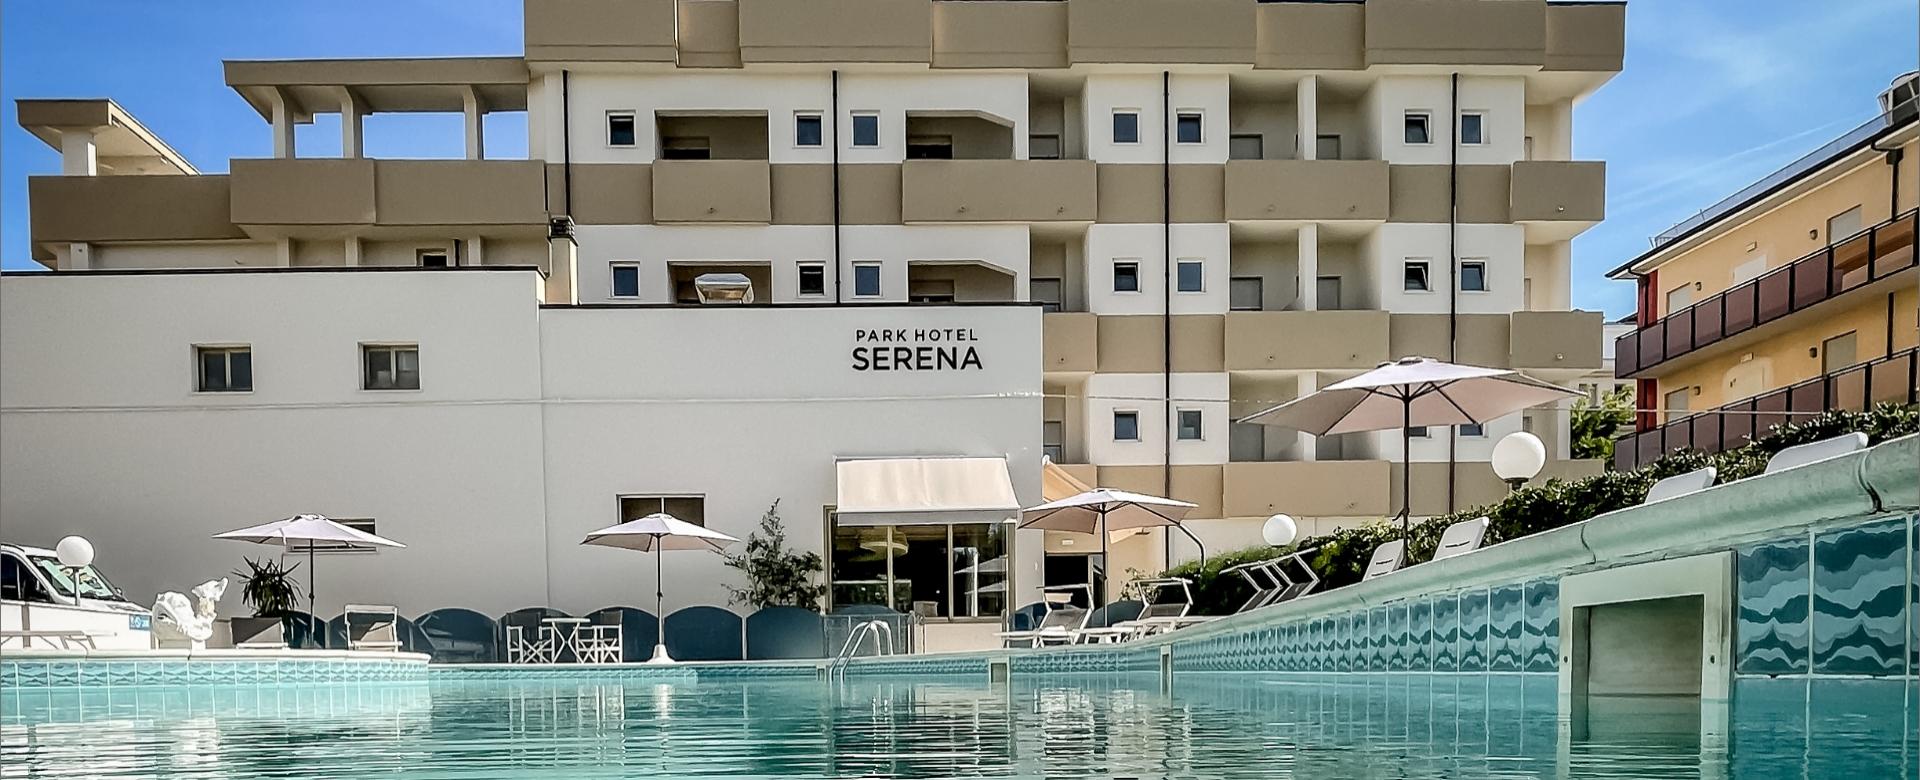 parkhotelserena en offers-in-august-weekly-all-inclusive-on-the-beach-of-rimini 009